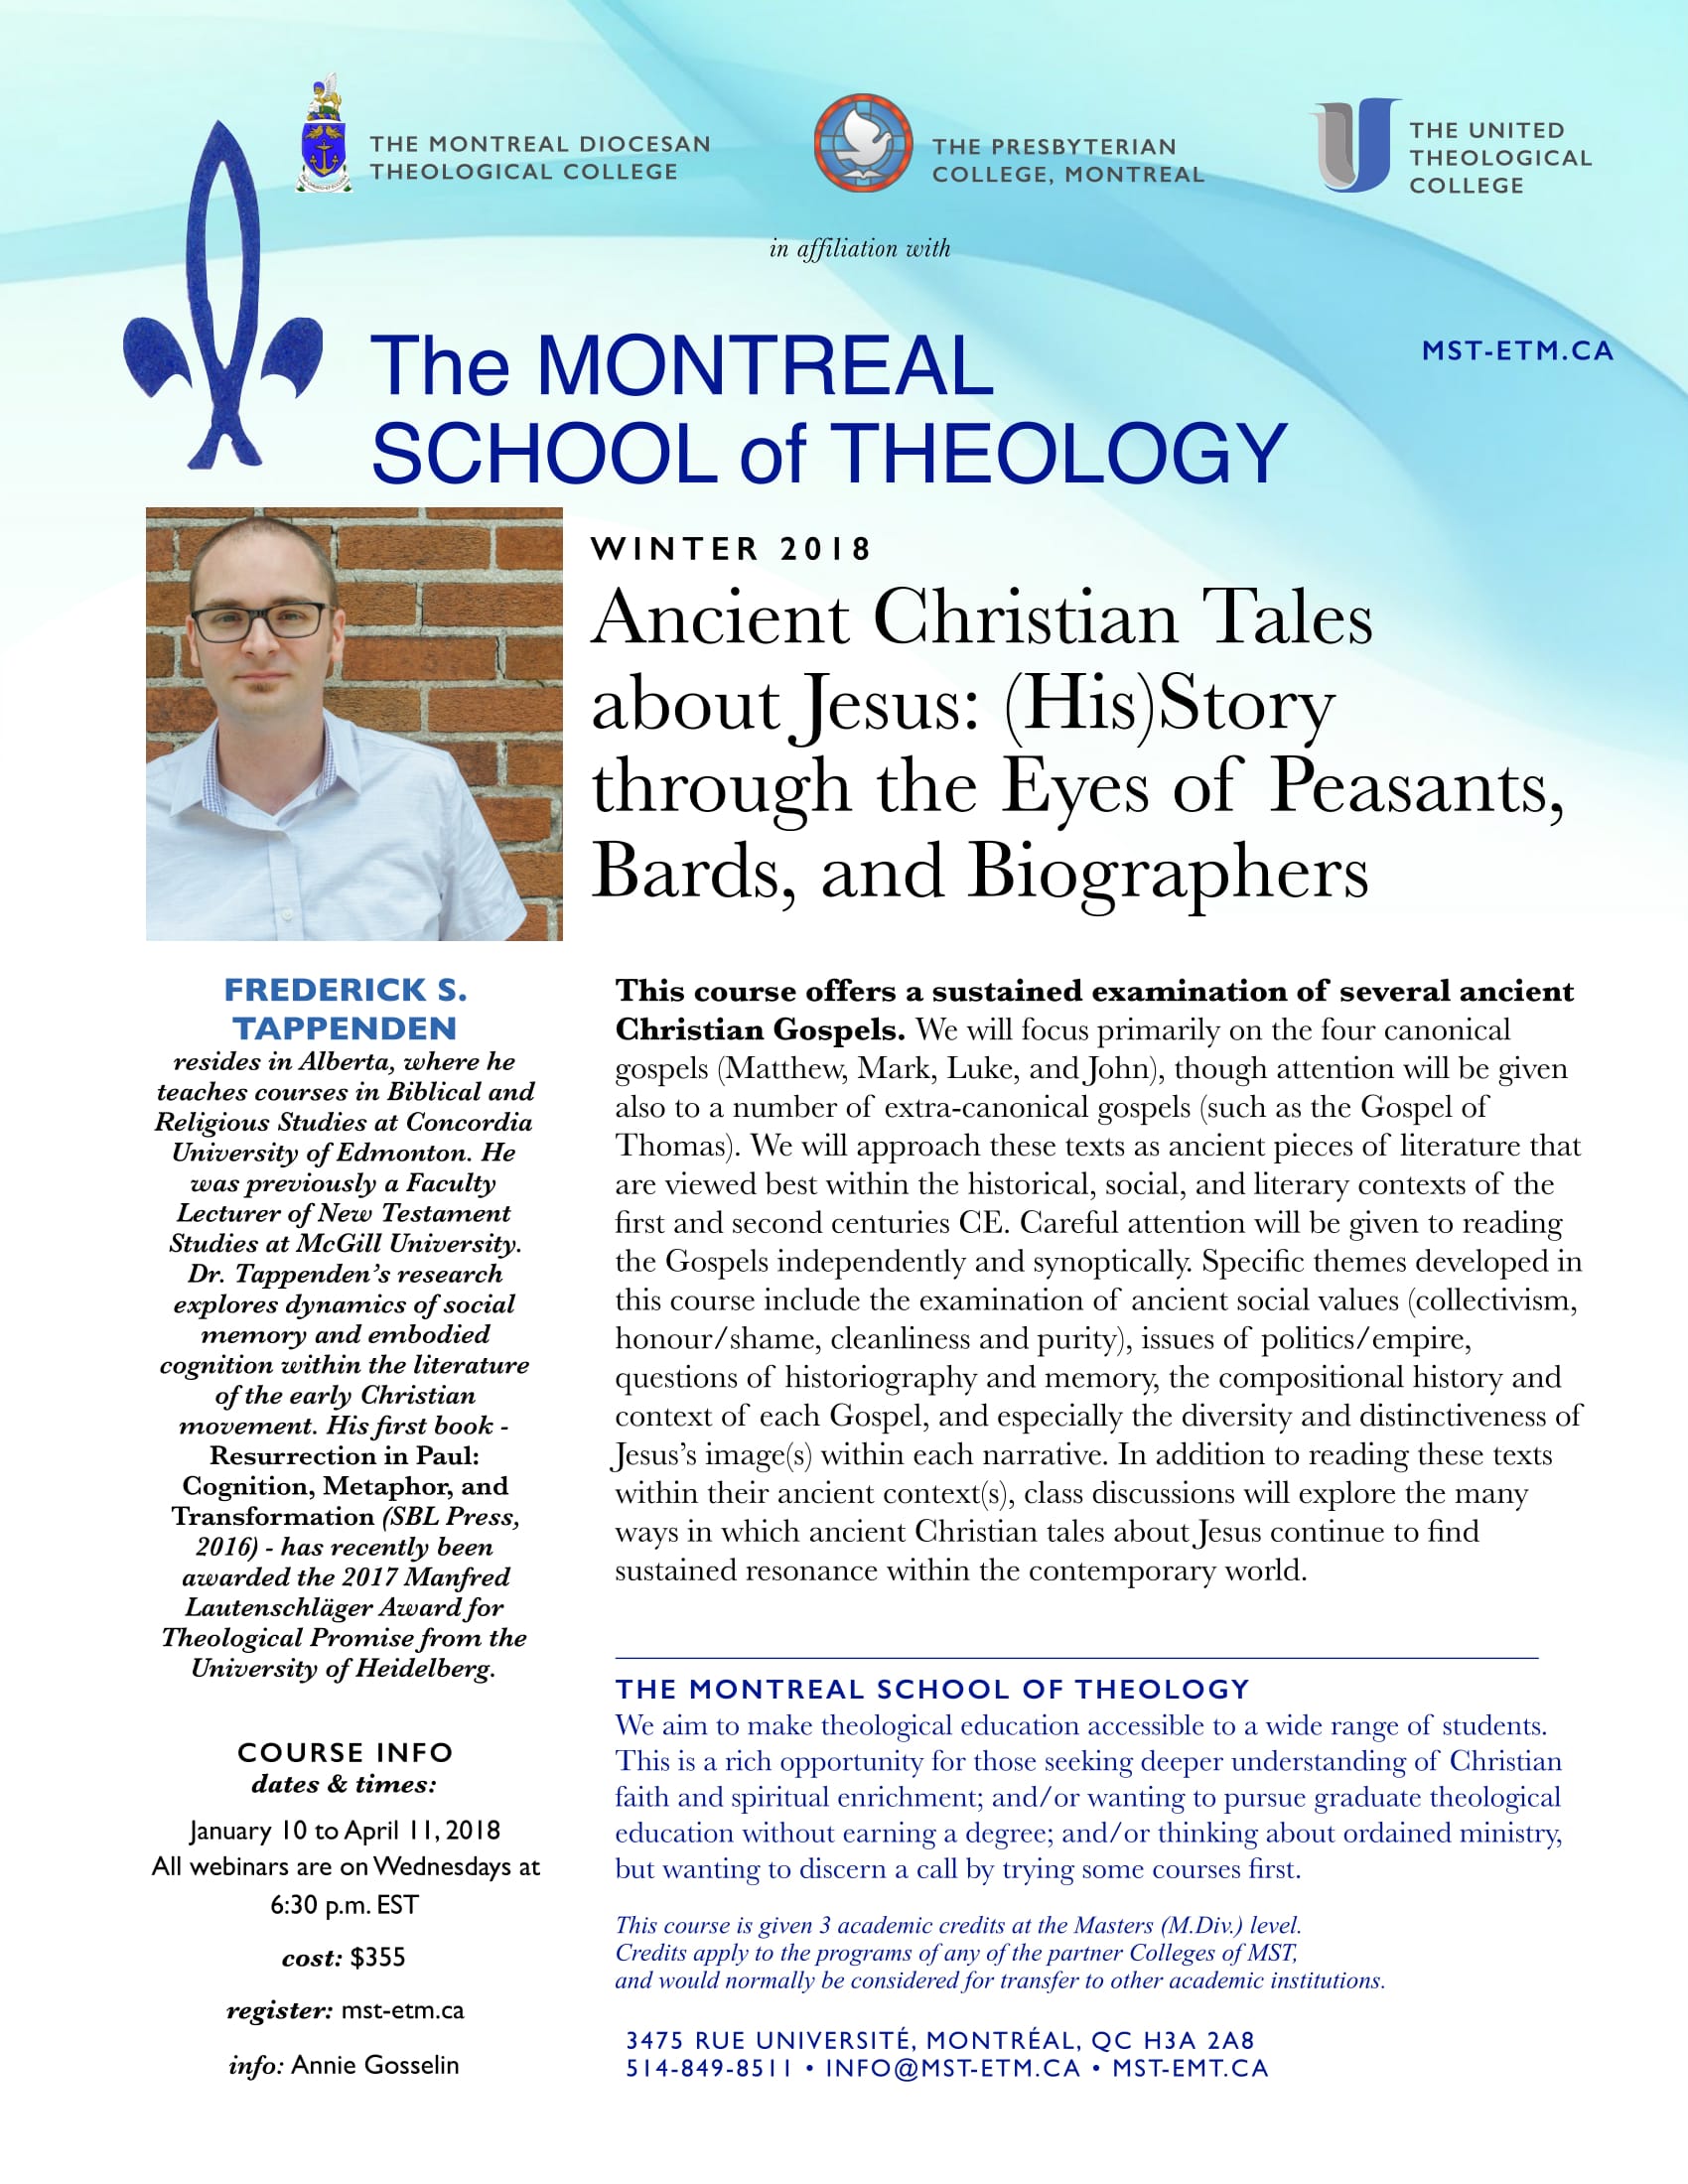 Ancient Christian Tales about Jesus: (His) Story through the Eyes of Peasants, Bards, and Biographers - Winter 2018 on-line credit course